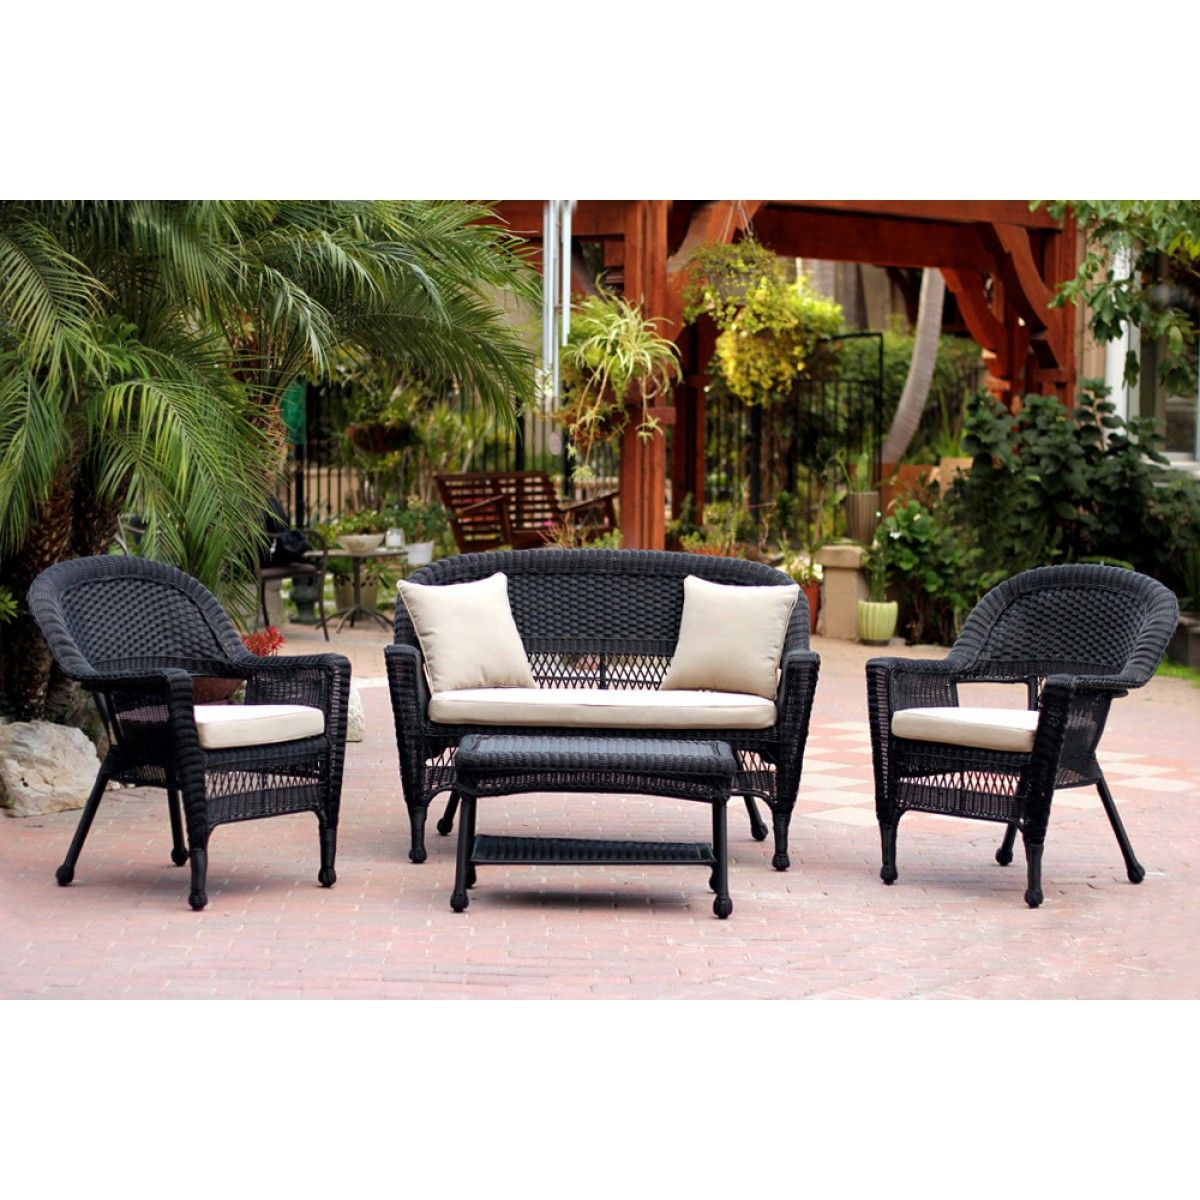 4pc Black Wicker Conversation Set – Tan Cushion In Well Known Black And Tan Rattan Coffee Tables (View 3 of 20)